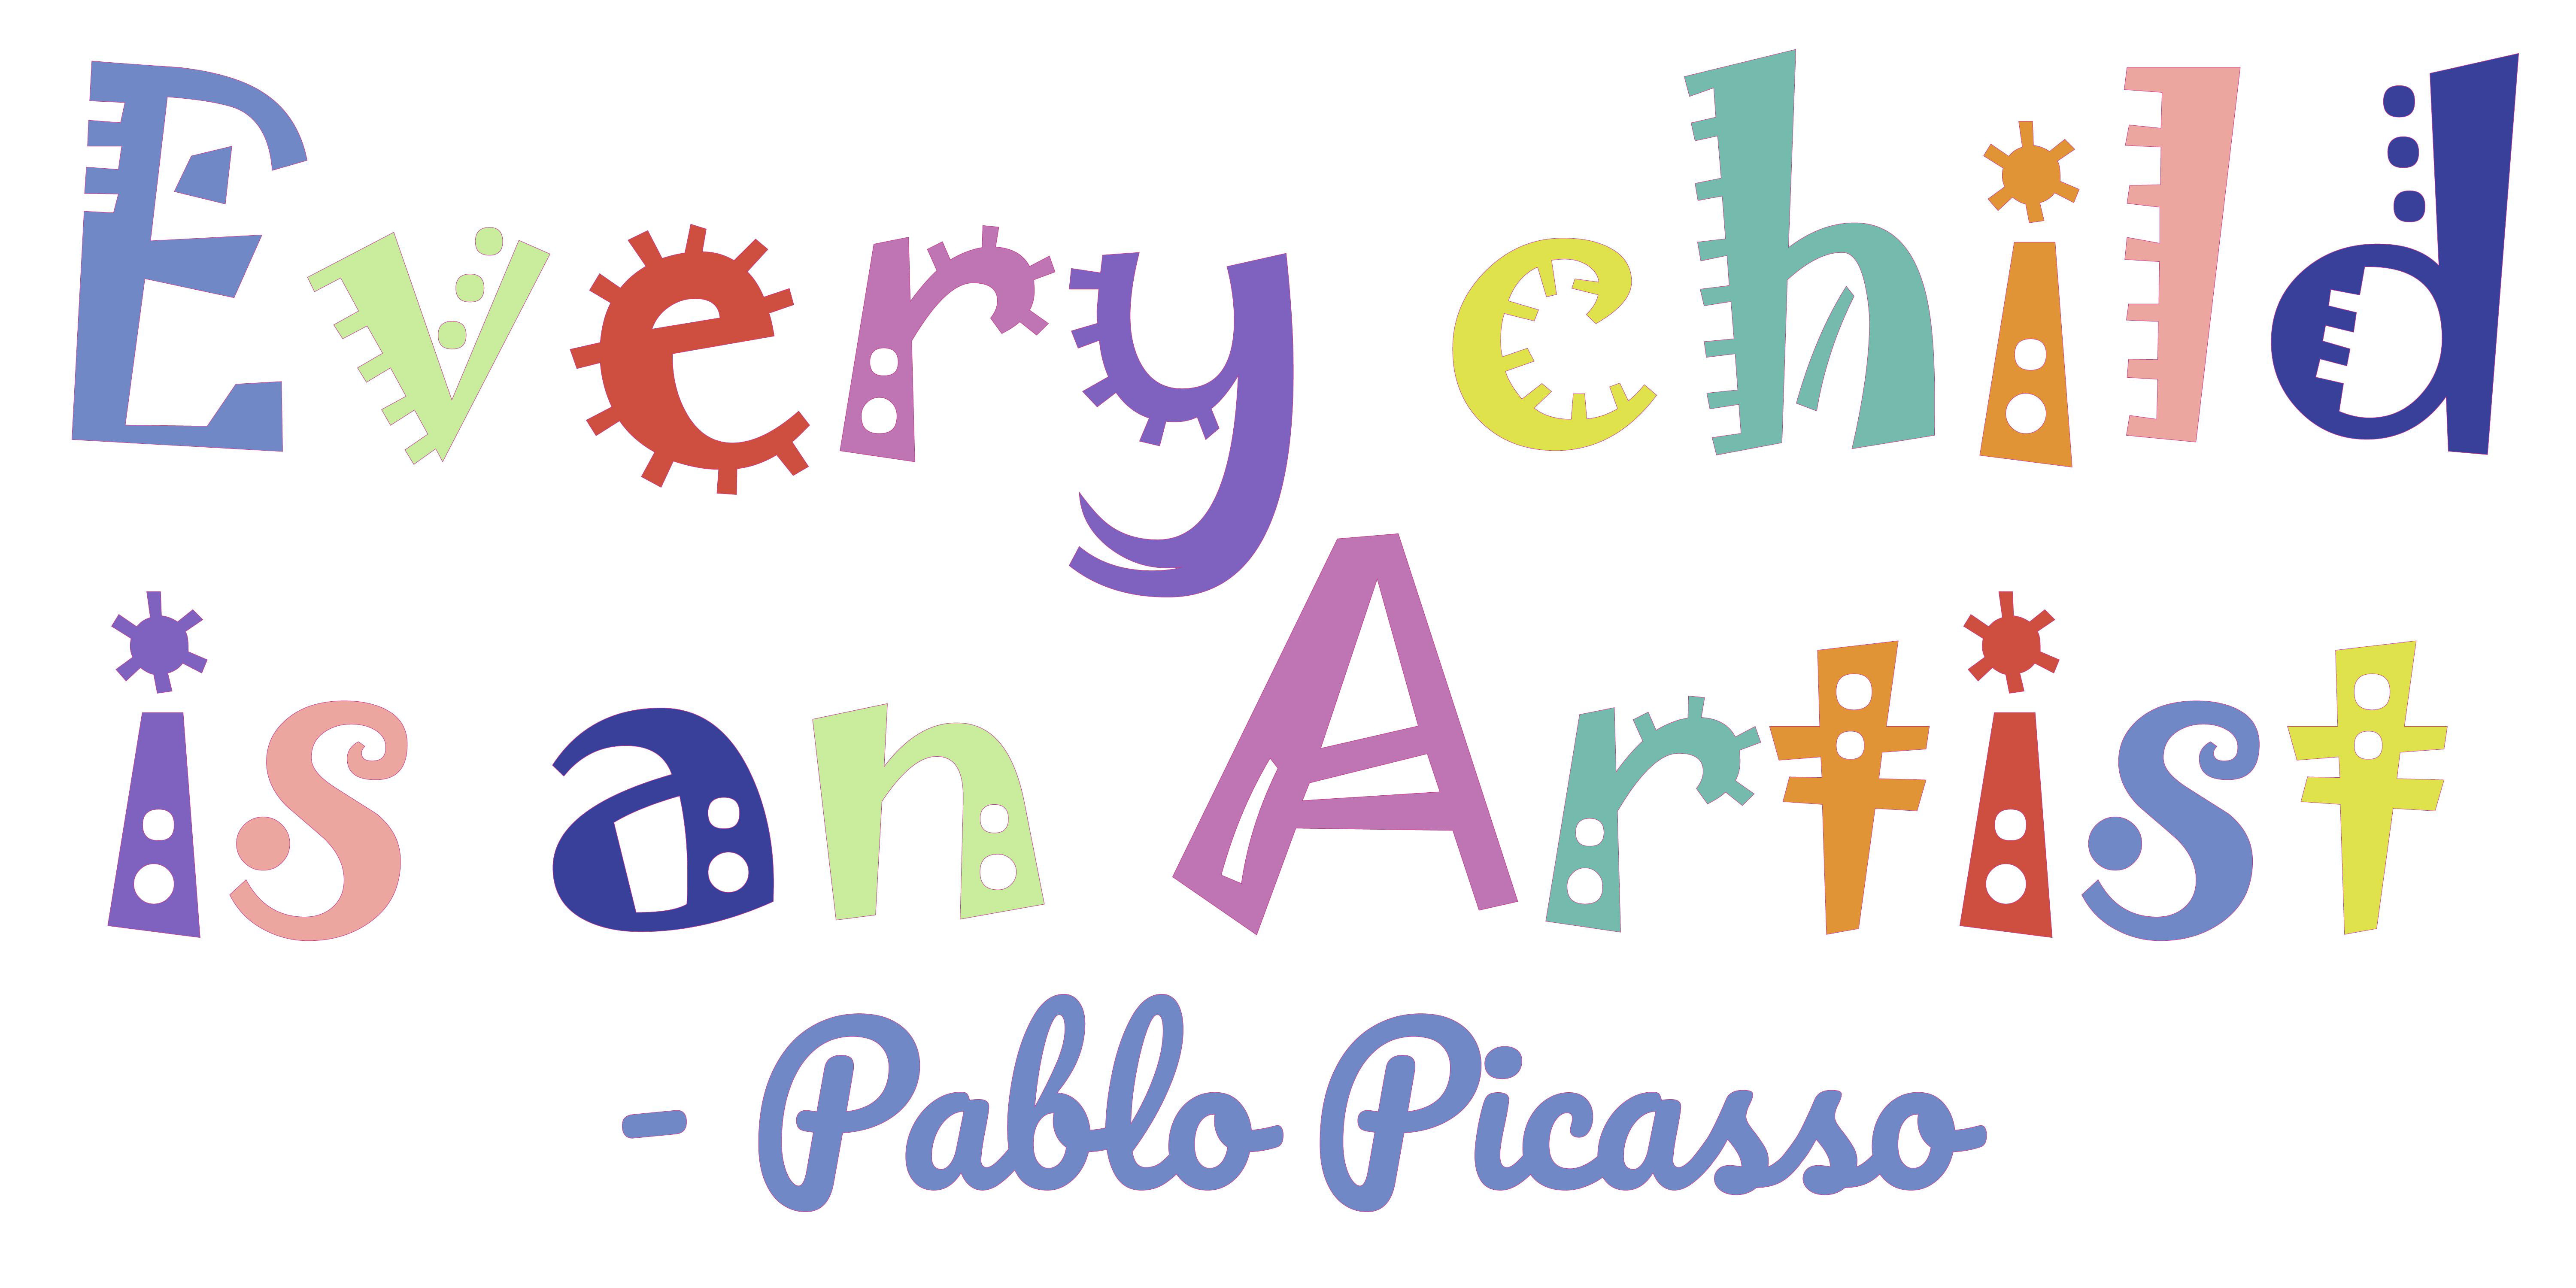 Every Child is an Artist Decal Children Artwork Display Decal Picasso Quote  Wall Sticker Printed Wall Decal 